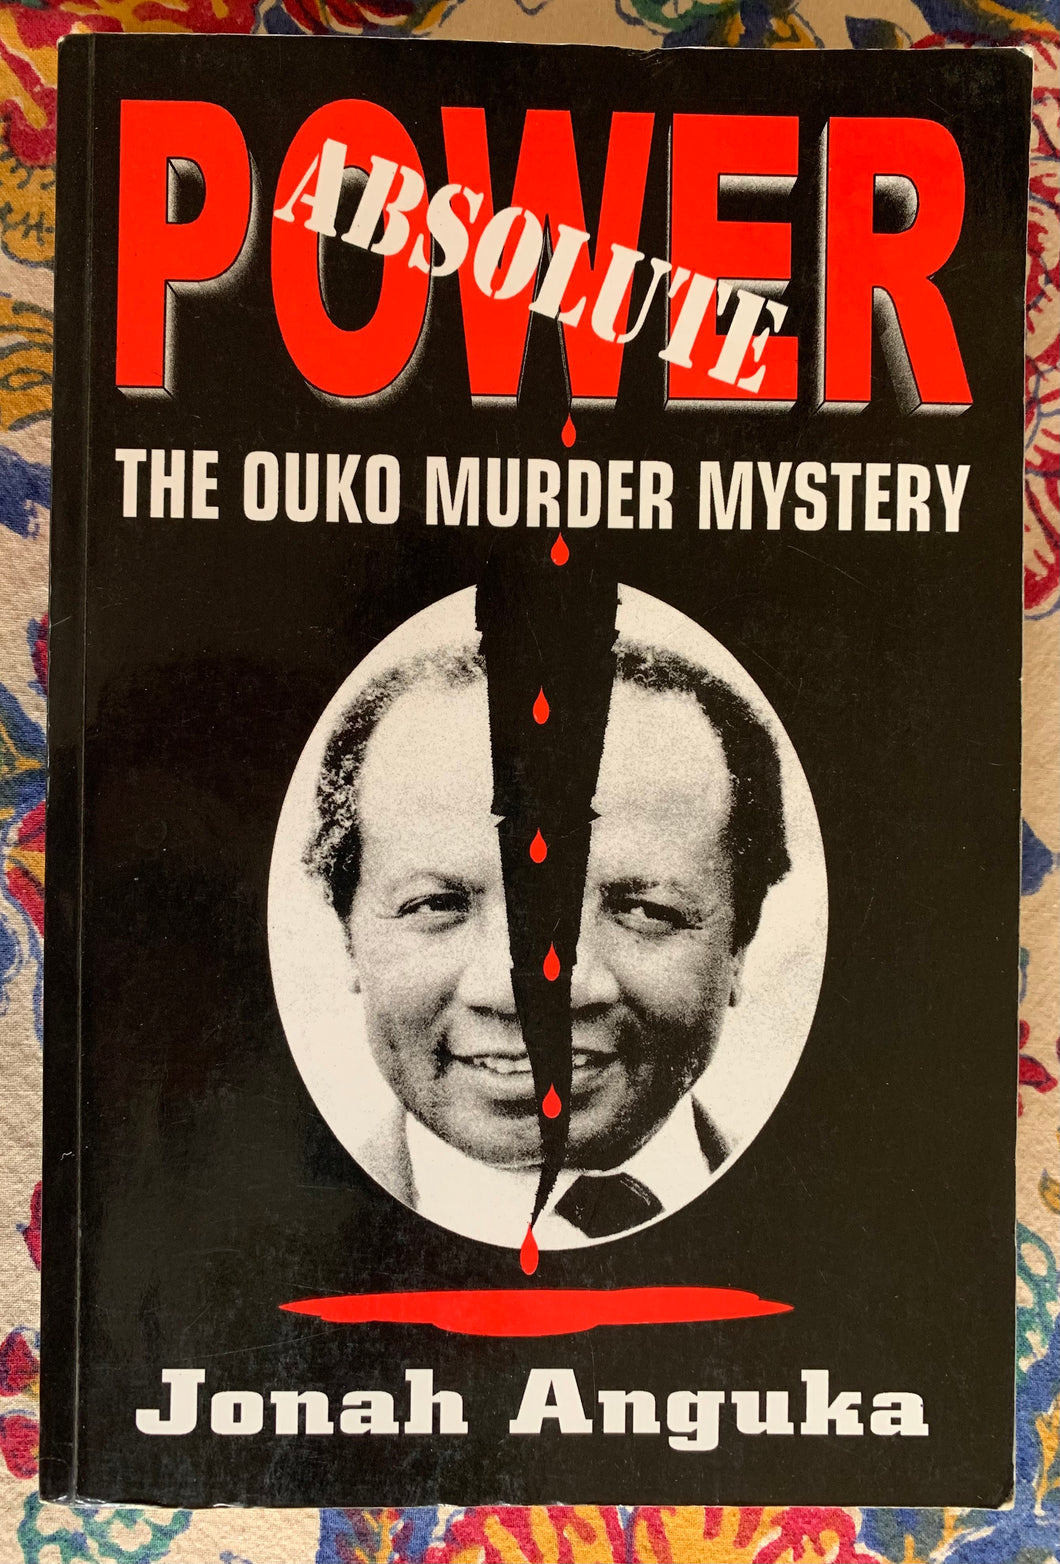 Absolute Power: The Ouko Murder Mystery